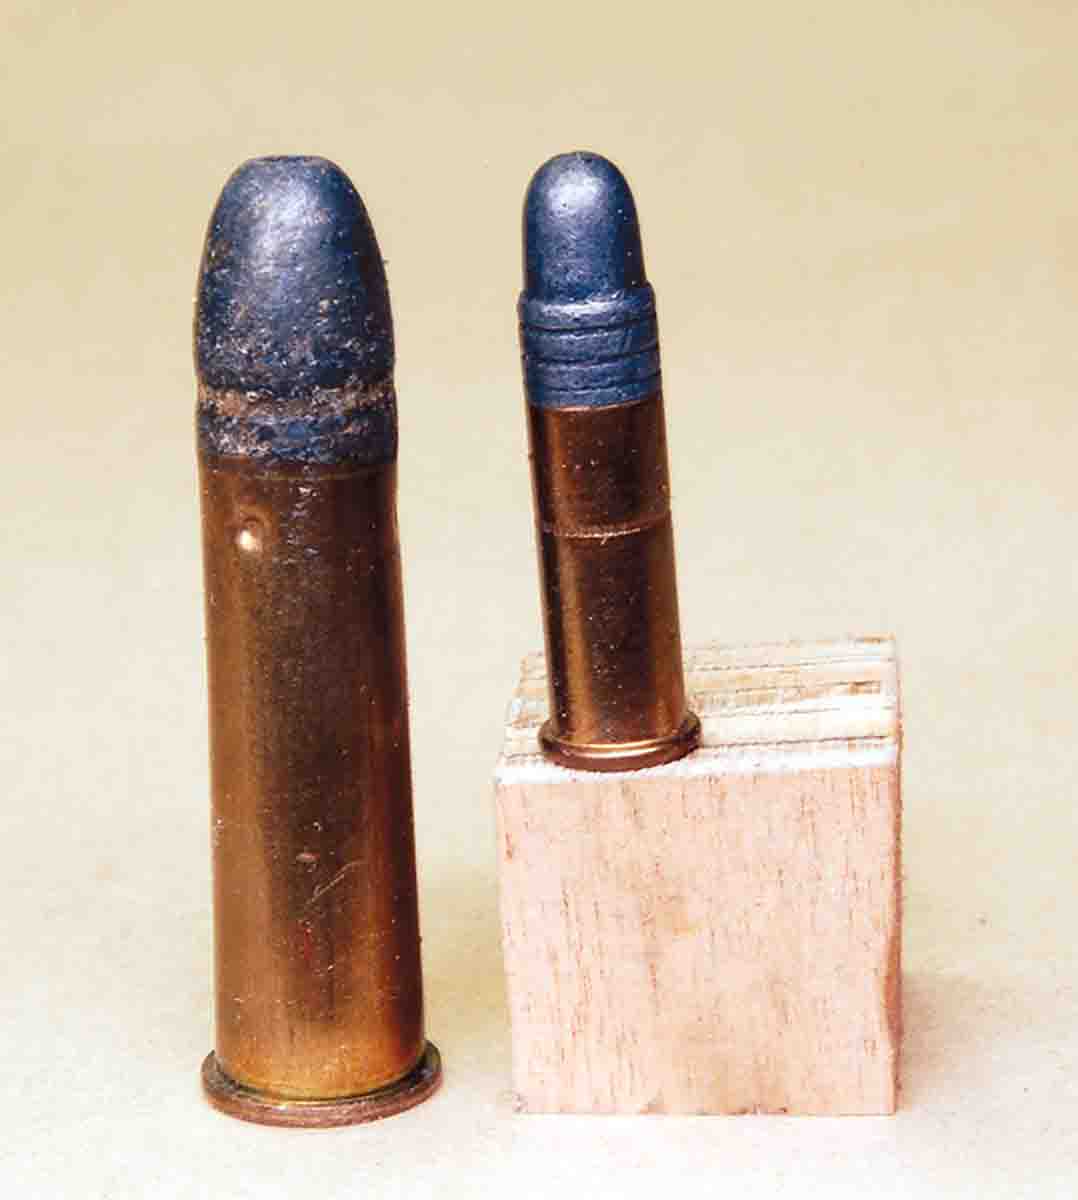 The .310 Cadet used an outside lubed bullet (left) just like the .22 rimfire (right).